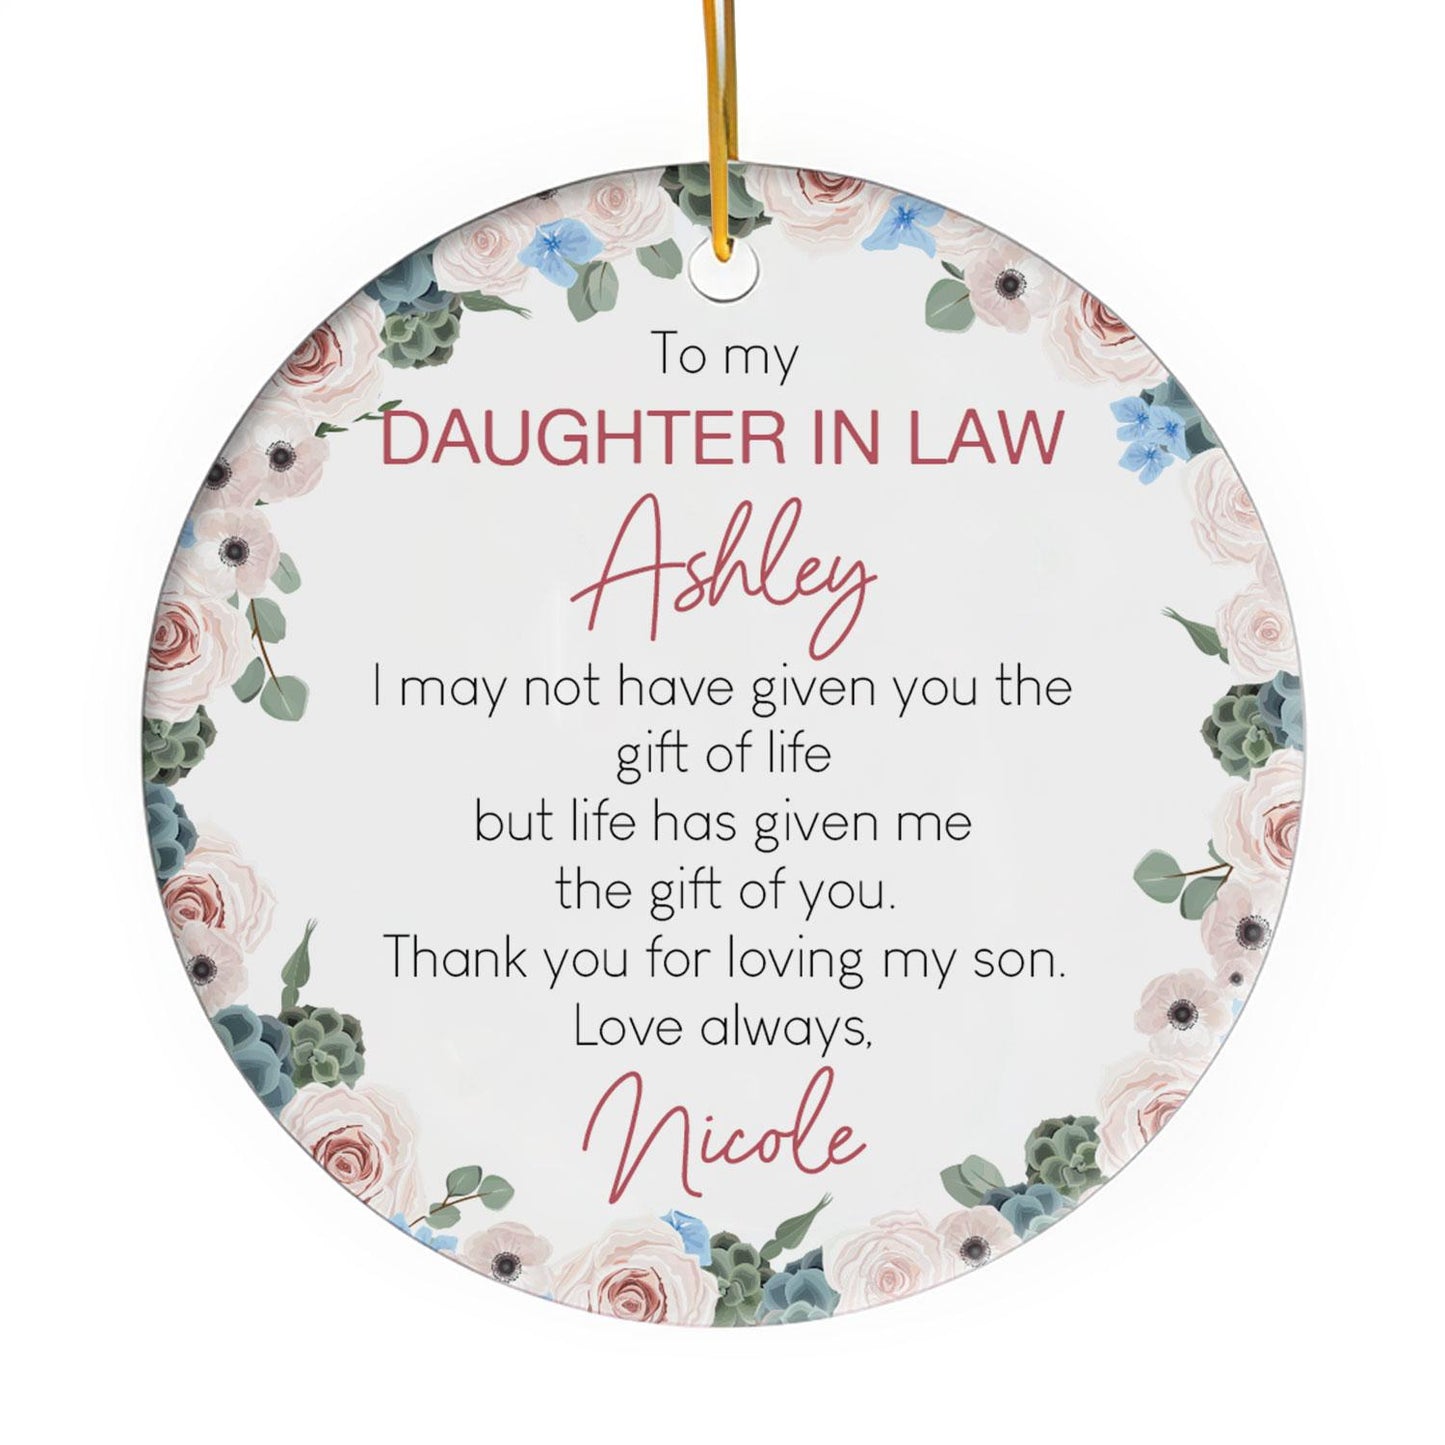 To My Mother In Law - Personalized Birthday or Christmas gift for Daughter In Law - Custom Circle Ceramic Ornament - MyMindfulGifts